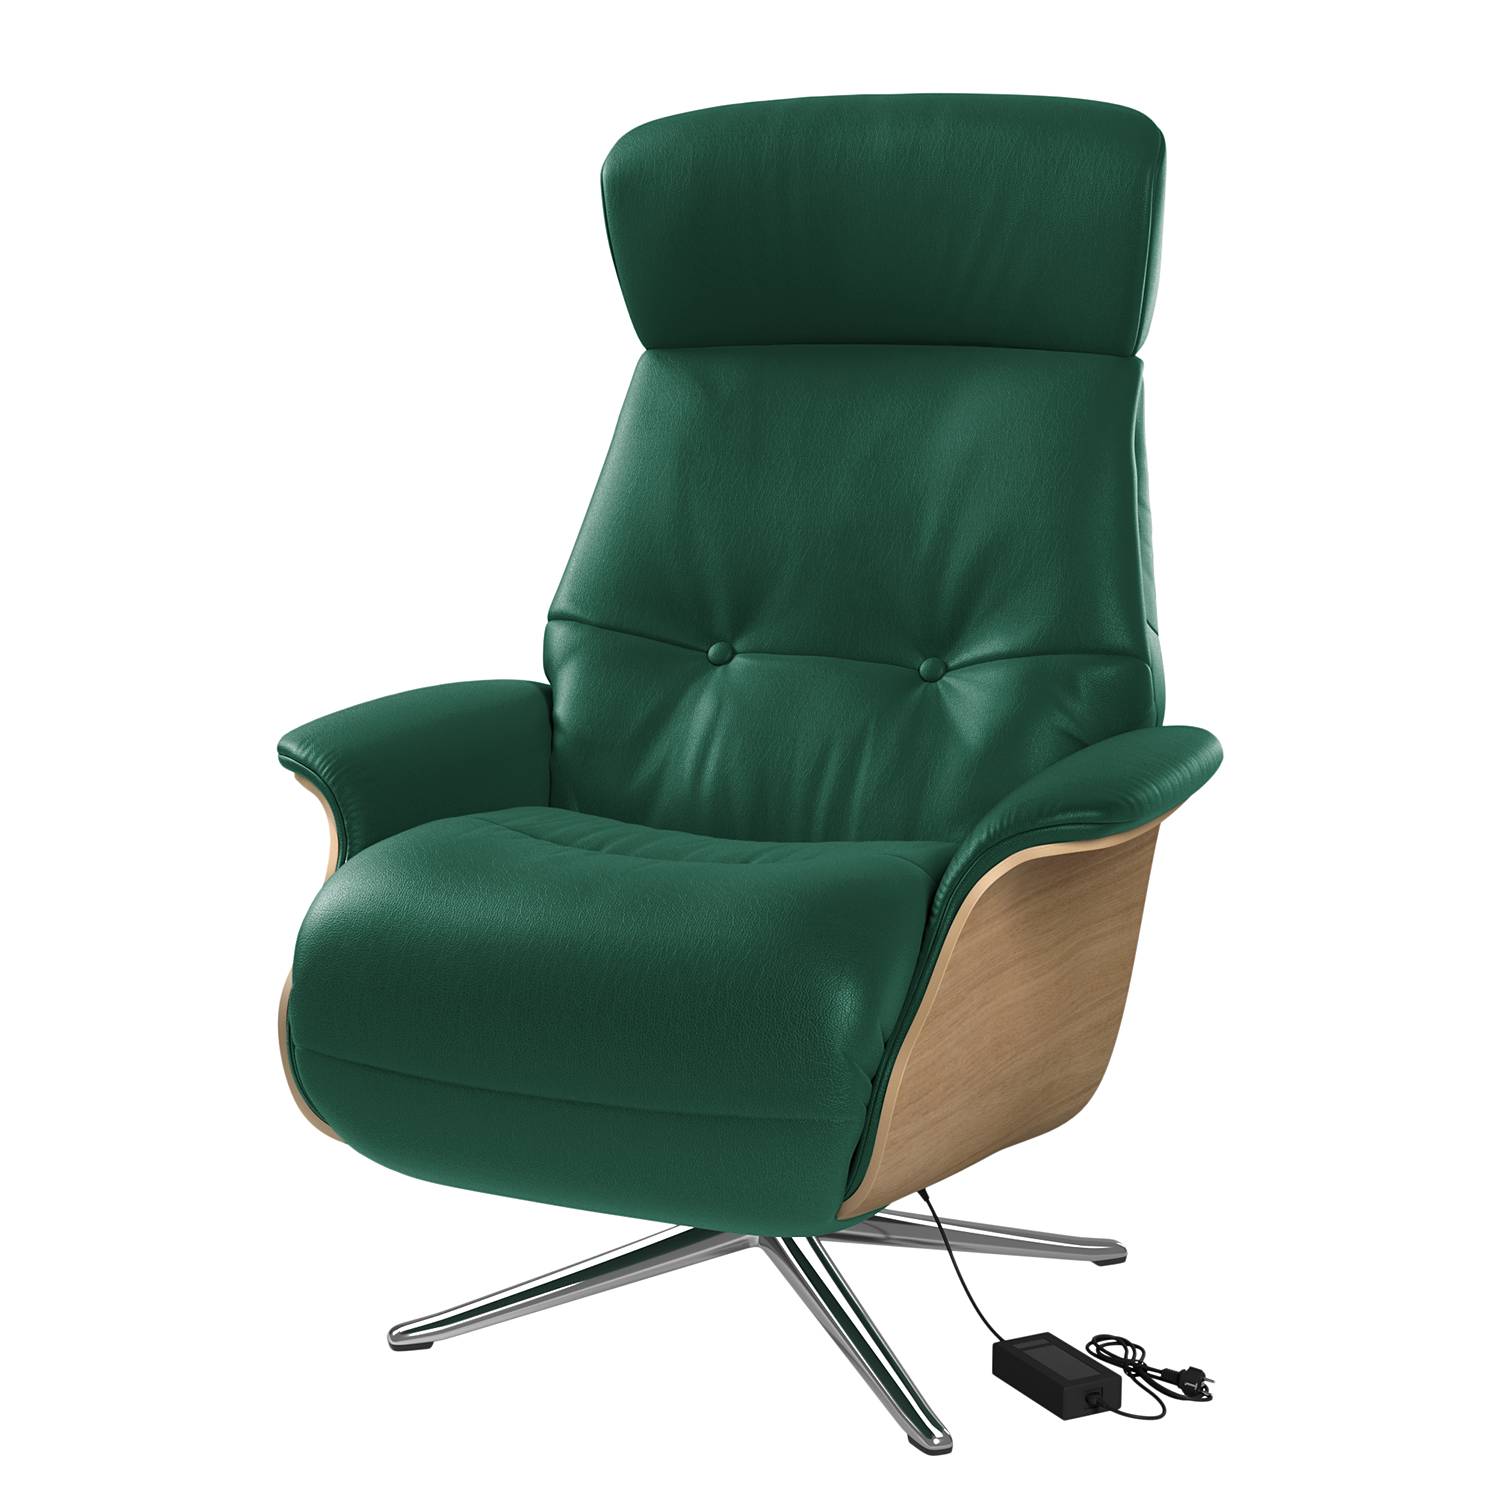 Image of Fauteuil relax Anderson VI 000000001000131440